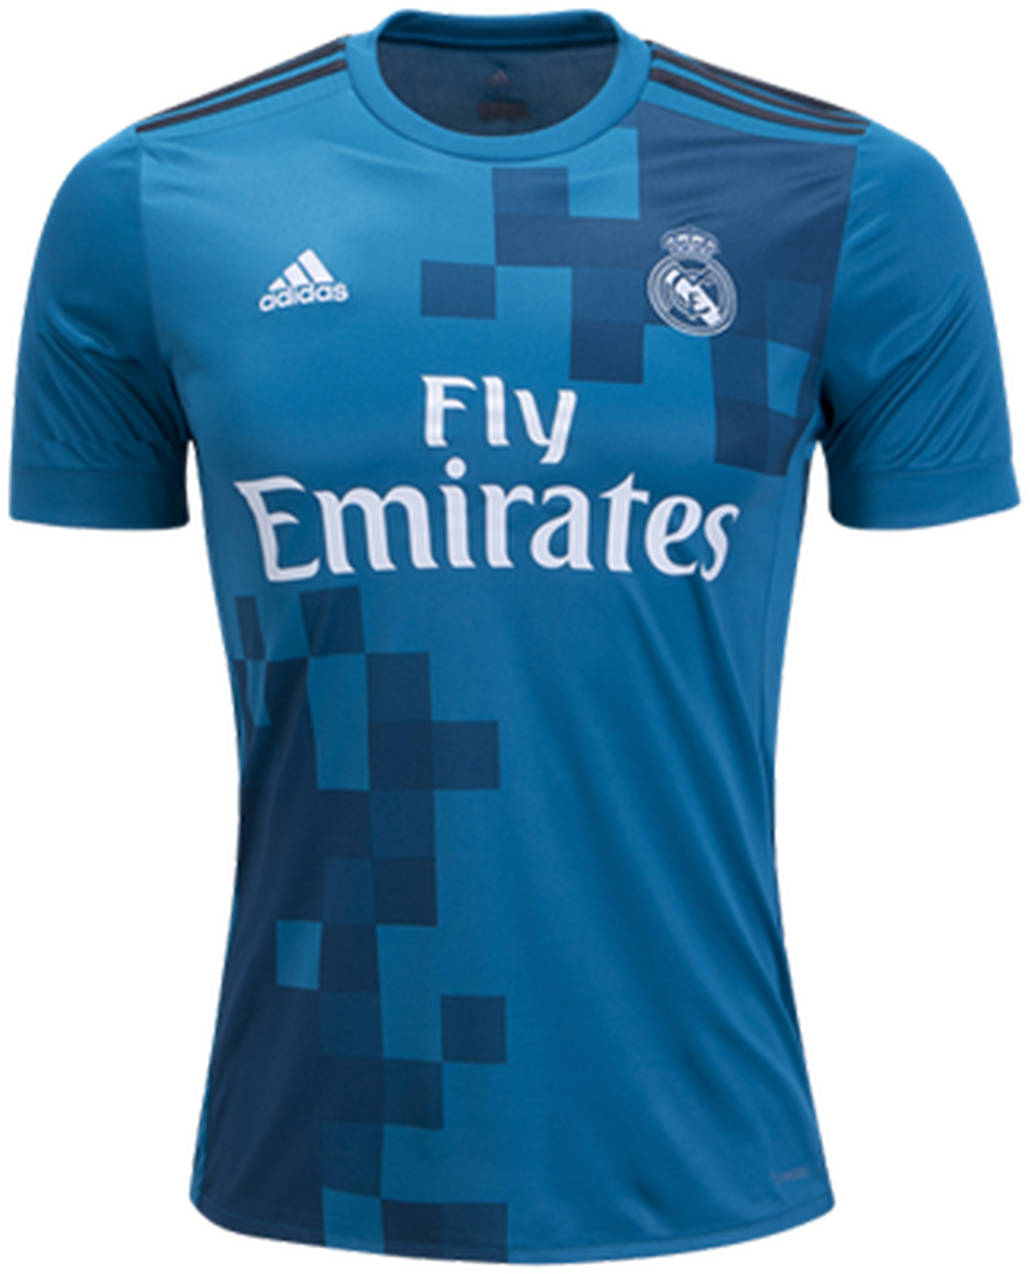 Fly Emirates Adidas Soccer Jersey PNG